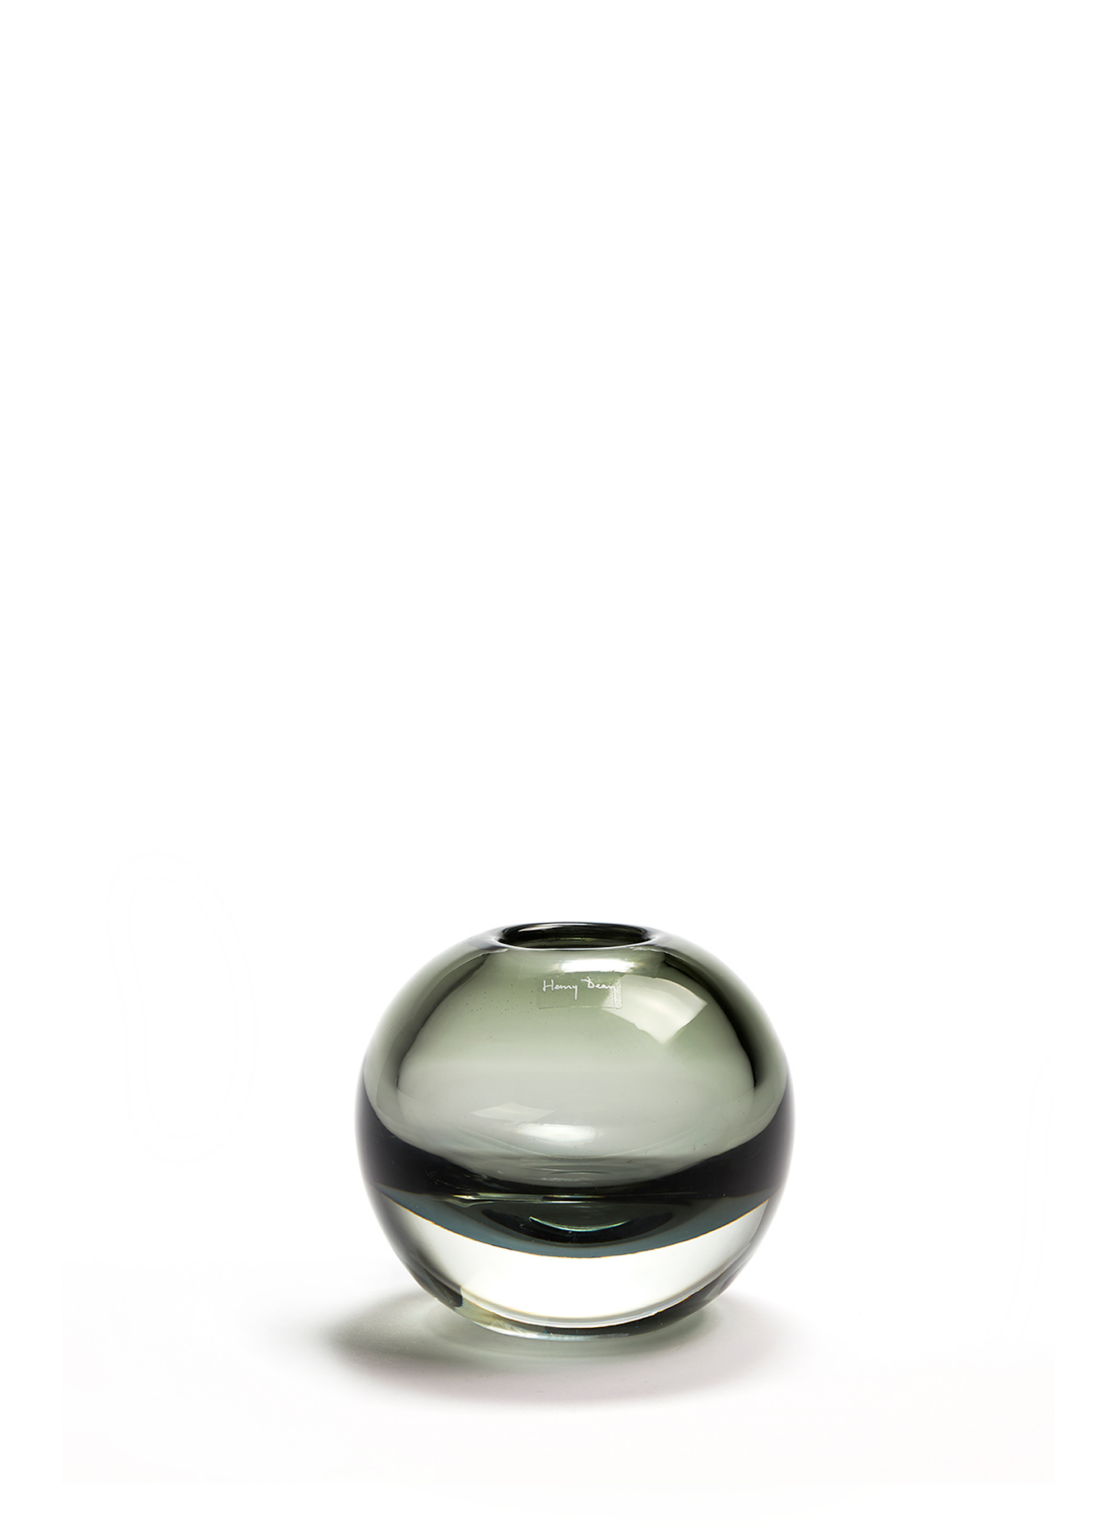 Small round handmade glass vase in a smoke grey color